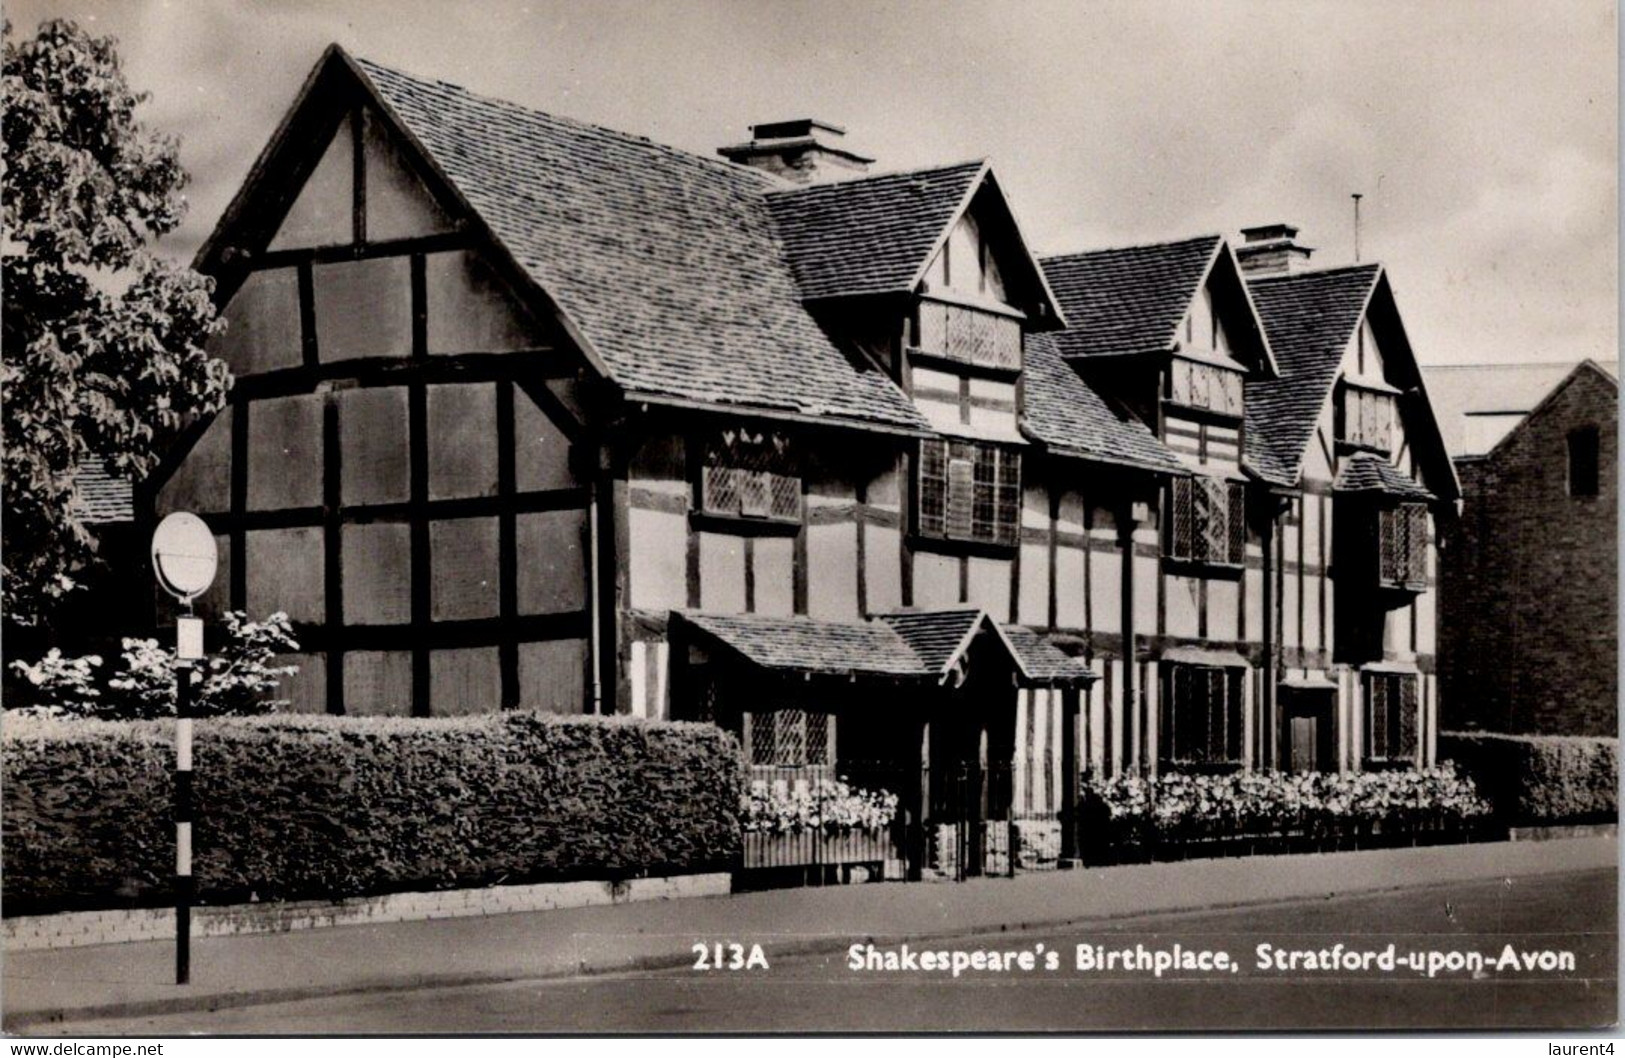 (1 M 24) VERY OLD - (b/w) Shakespeares's Birthplace - The House - Stratford Upon Avon